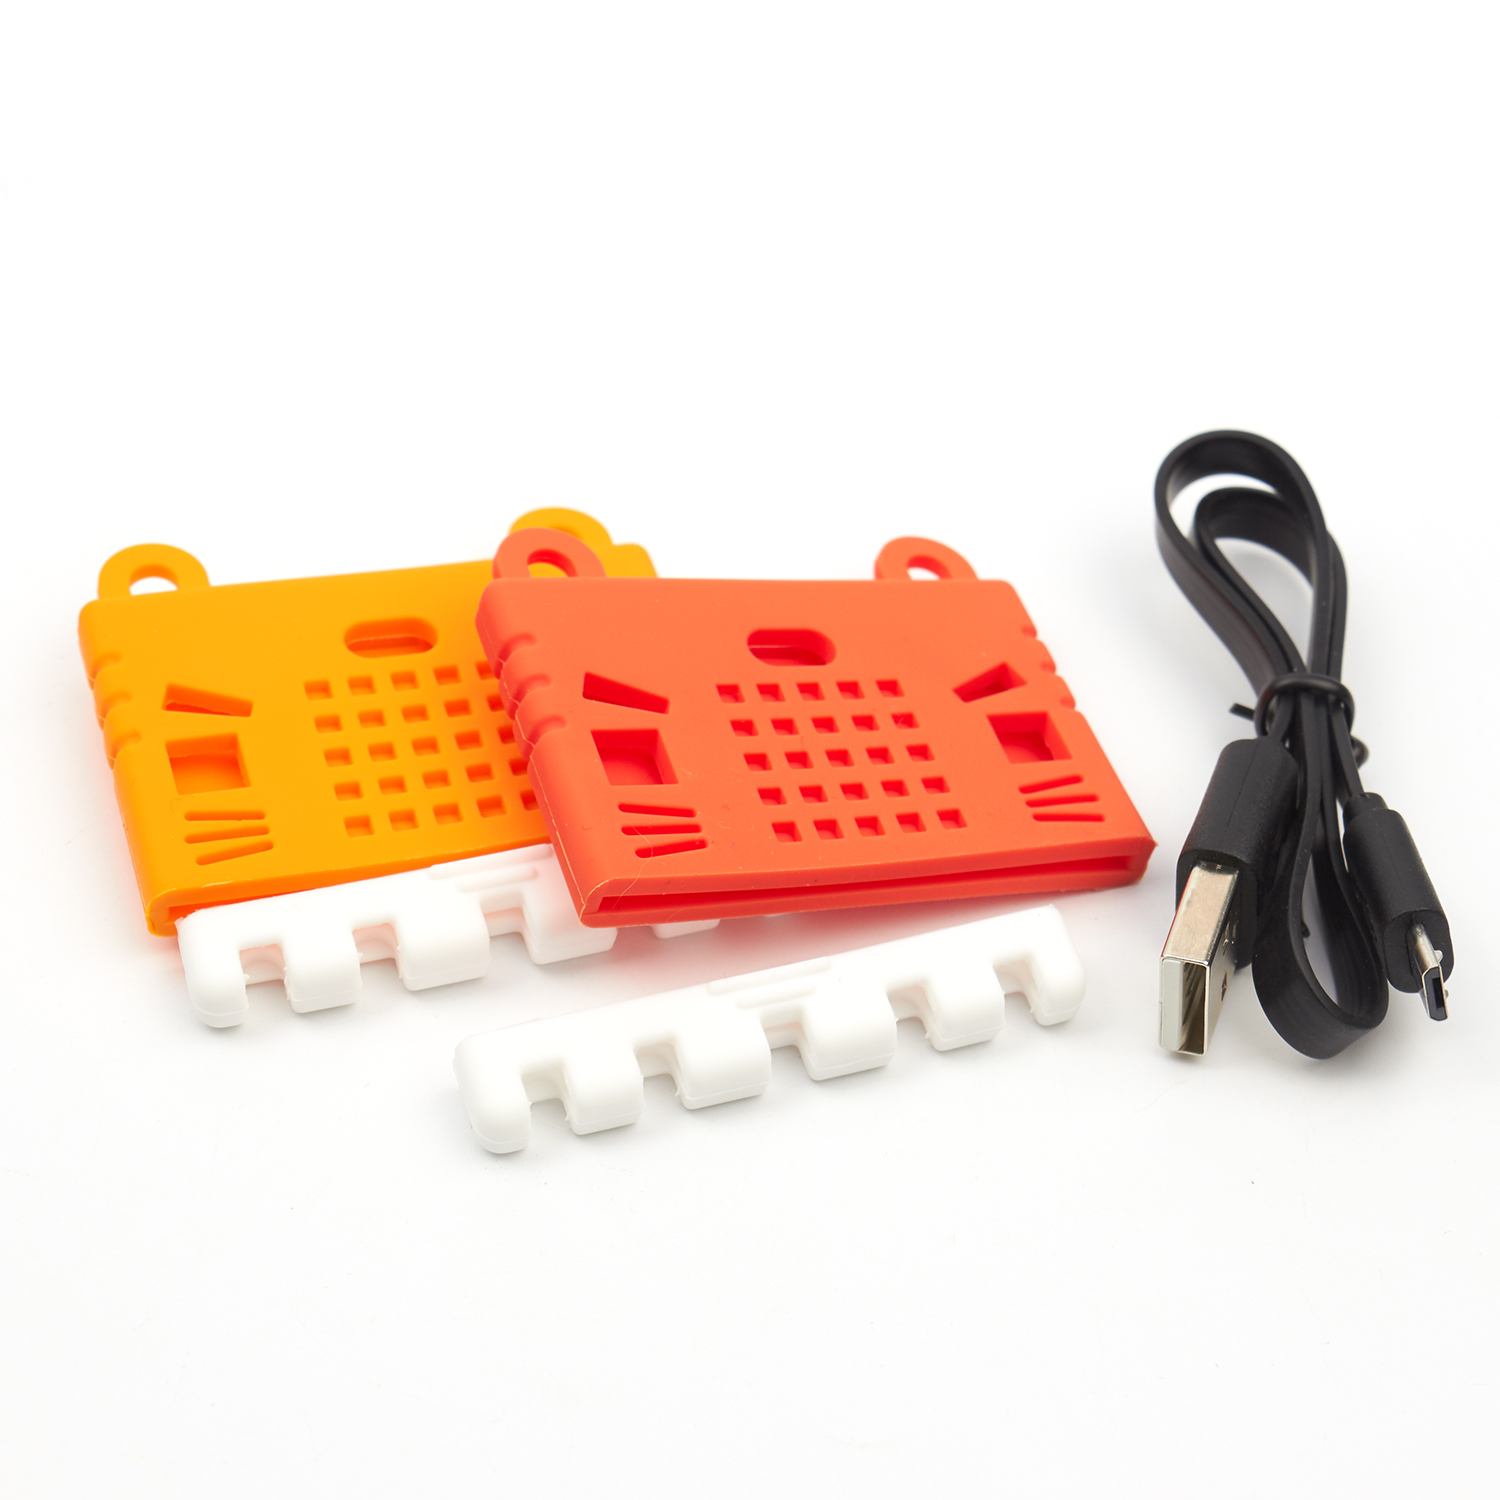 KittenBotreg-Microbit-Silicone-Cute-Pattern-Case-for-Microbit-Expansion-Board-1281838-7